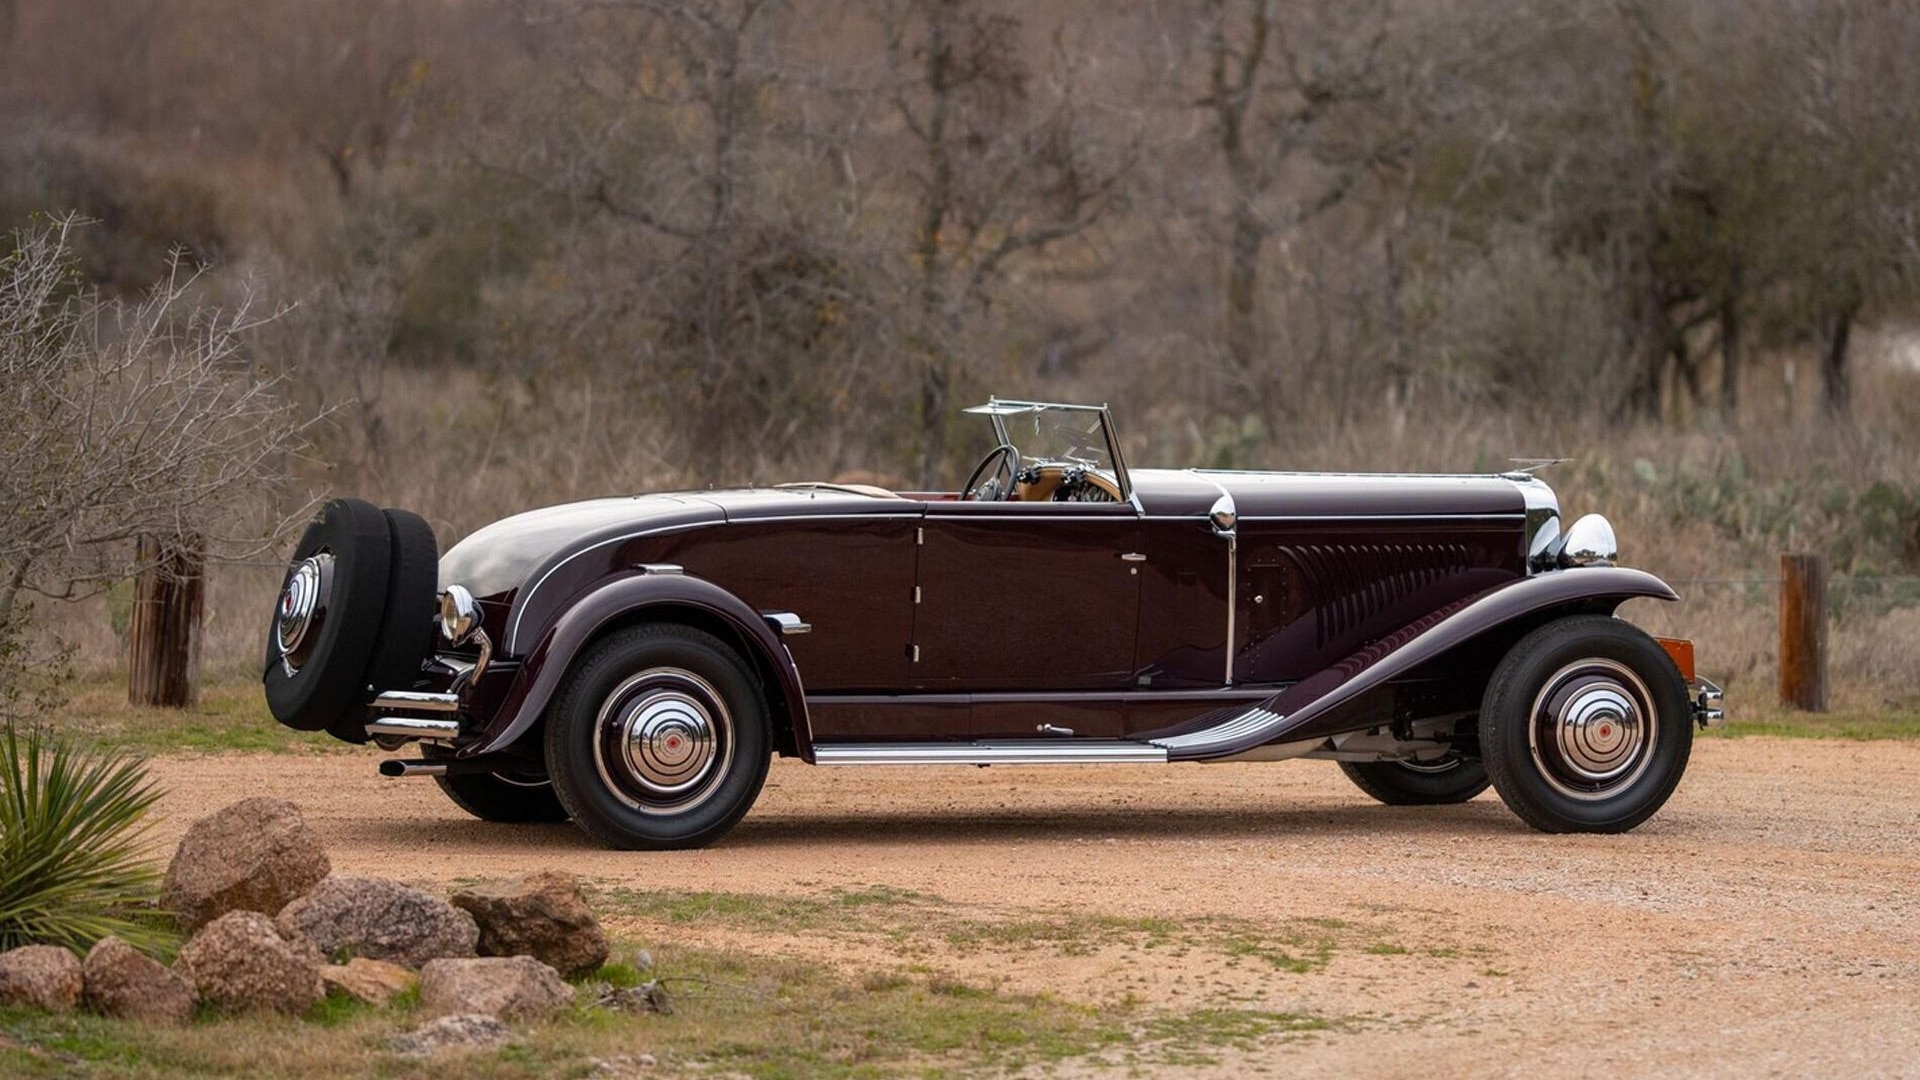 1930 Duesenberg Model J with coachwork by Murphy - Photo credit: RM Sotheby's